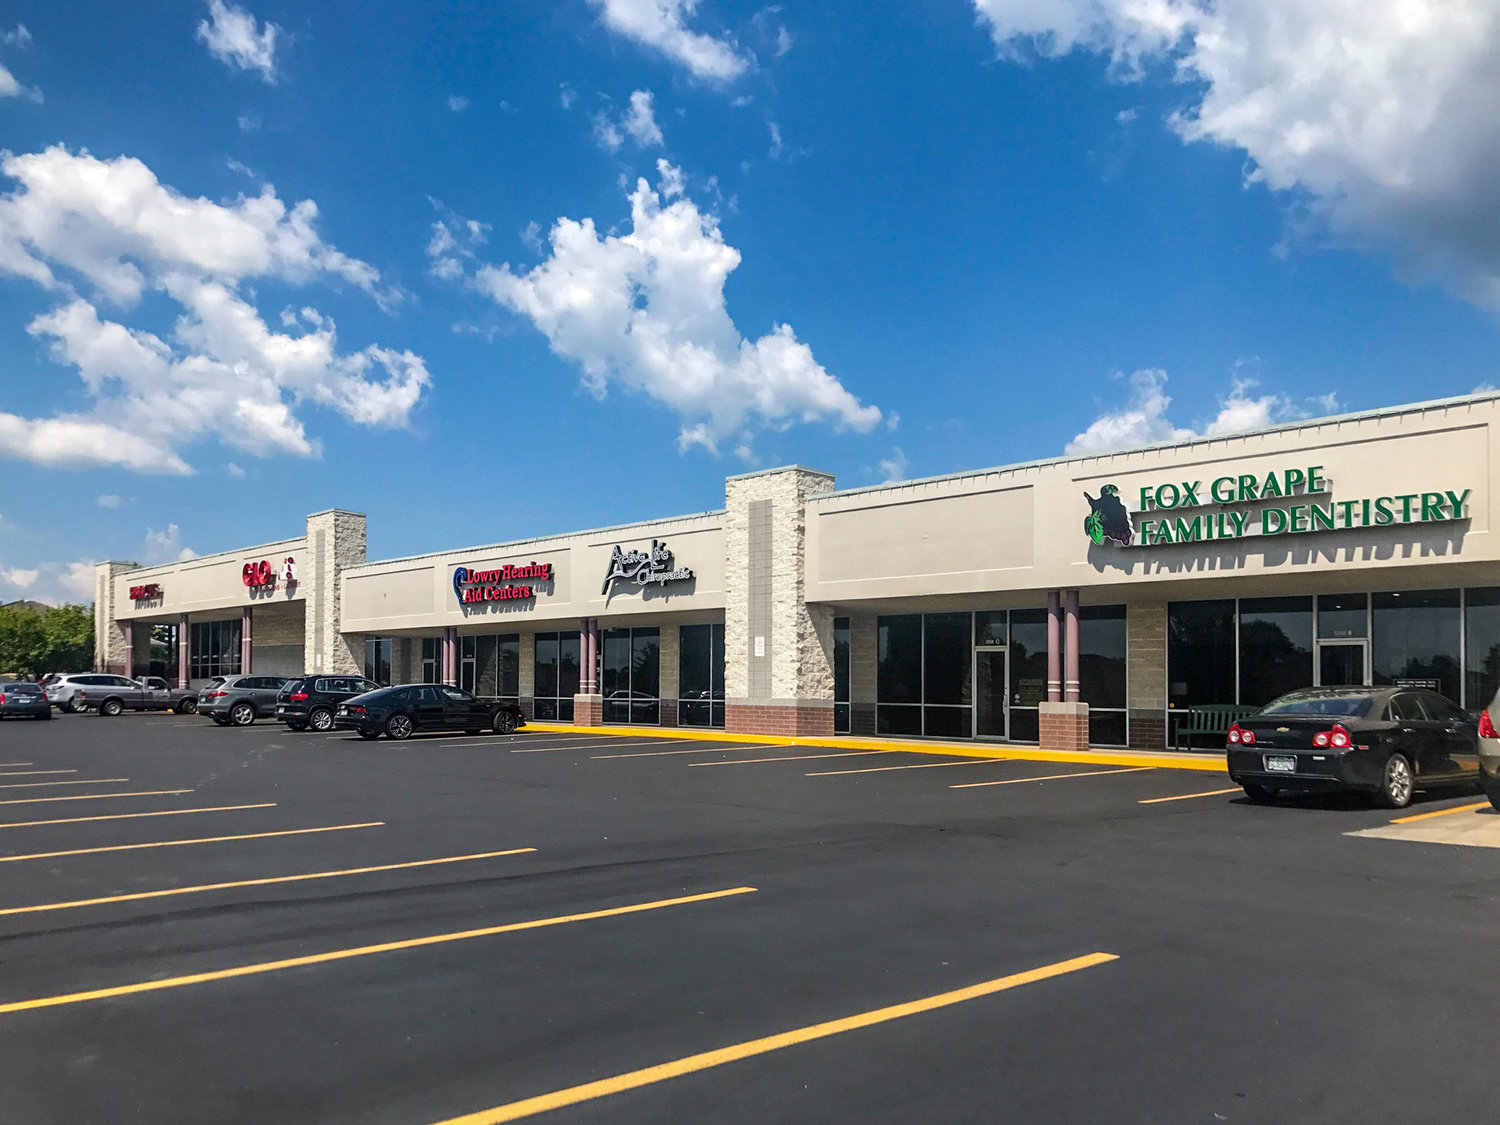 Investment Realty now operates in Fox Grape Plaza.